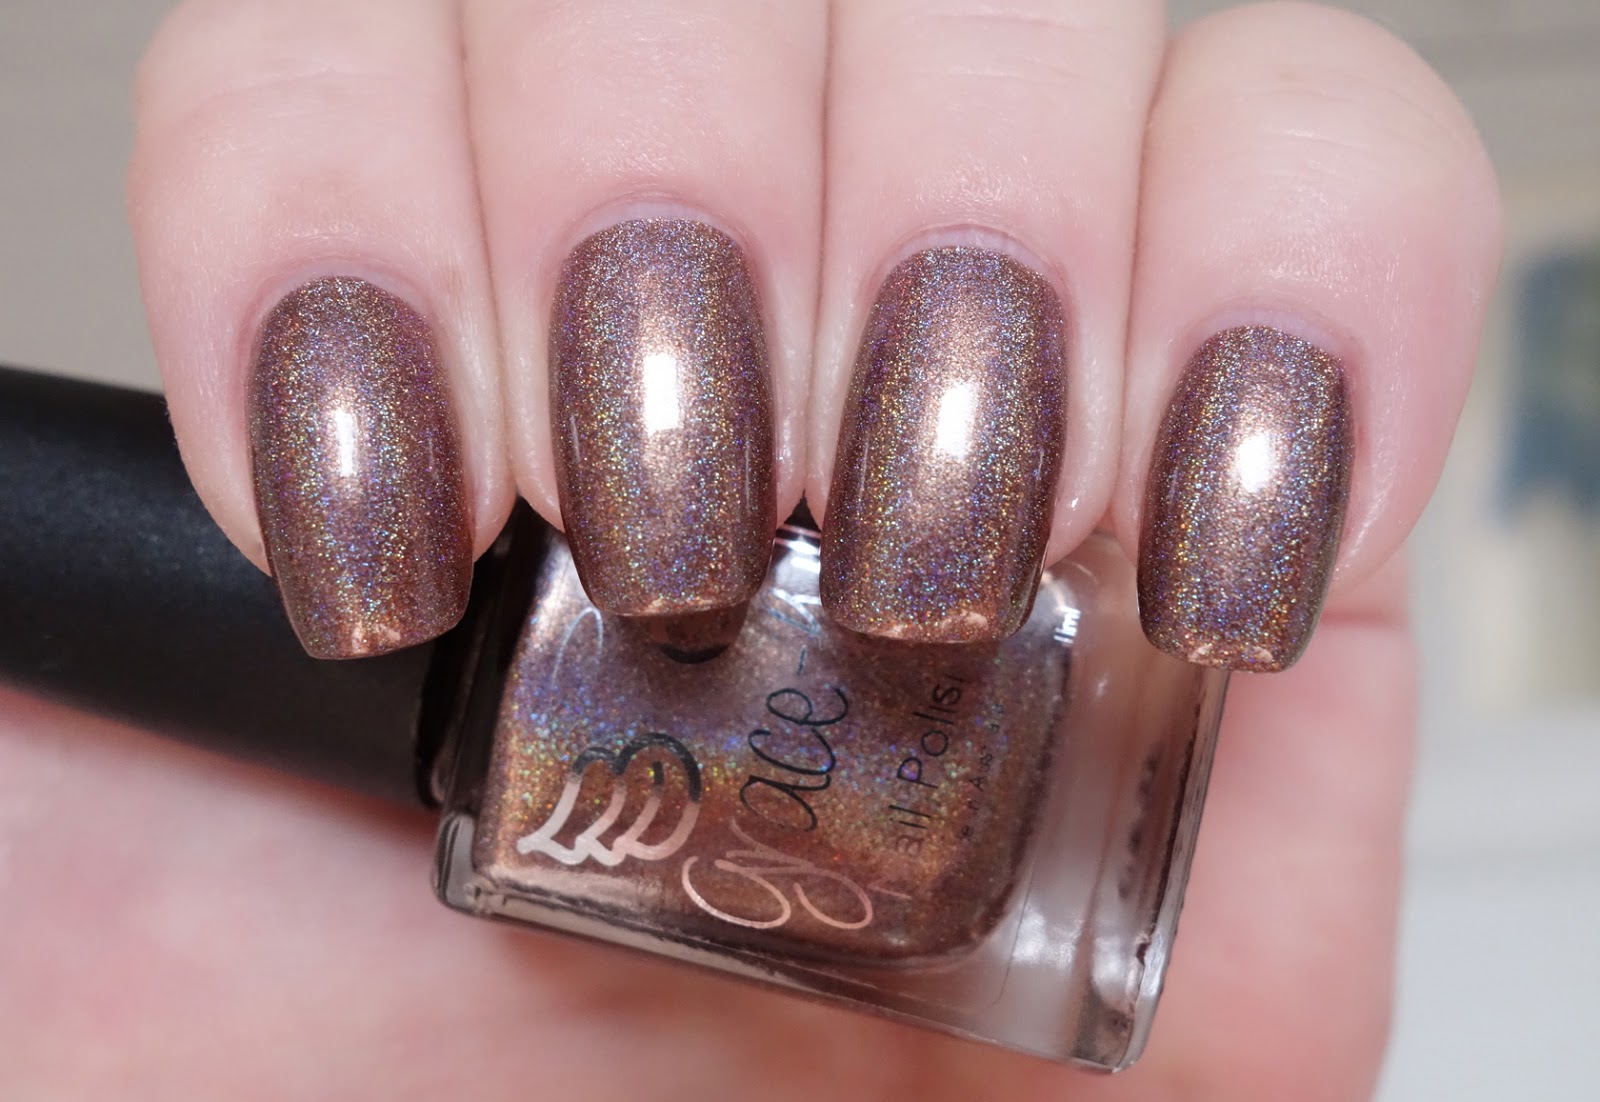 3. Burnt Hazelnut Nail Lacquer - wide 4